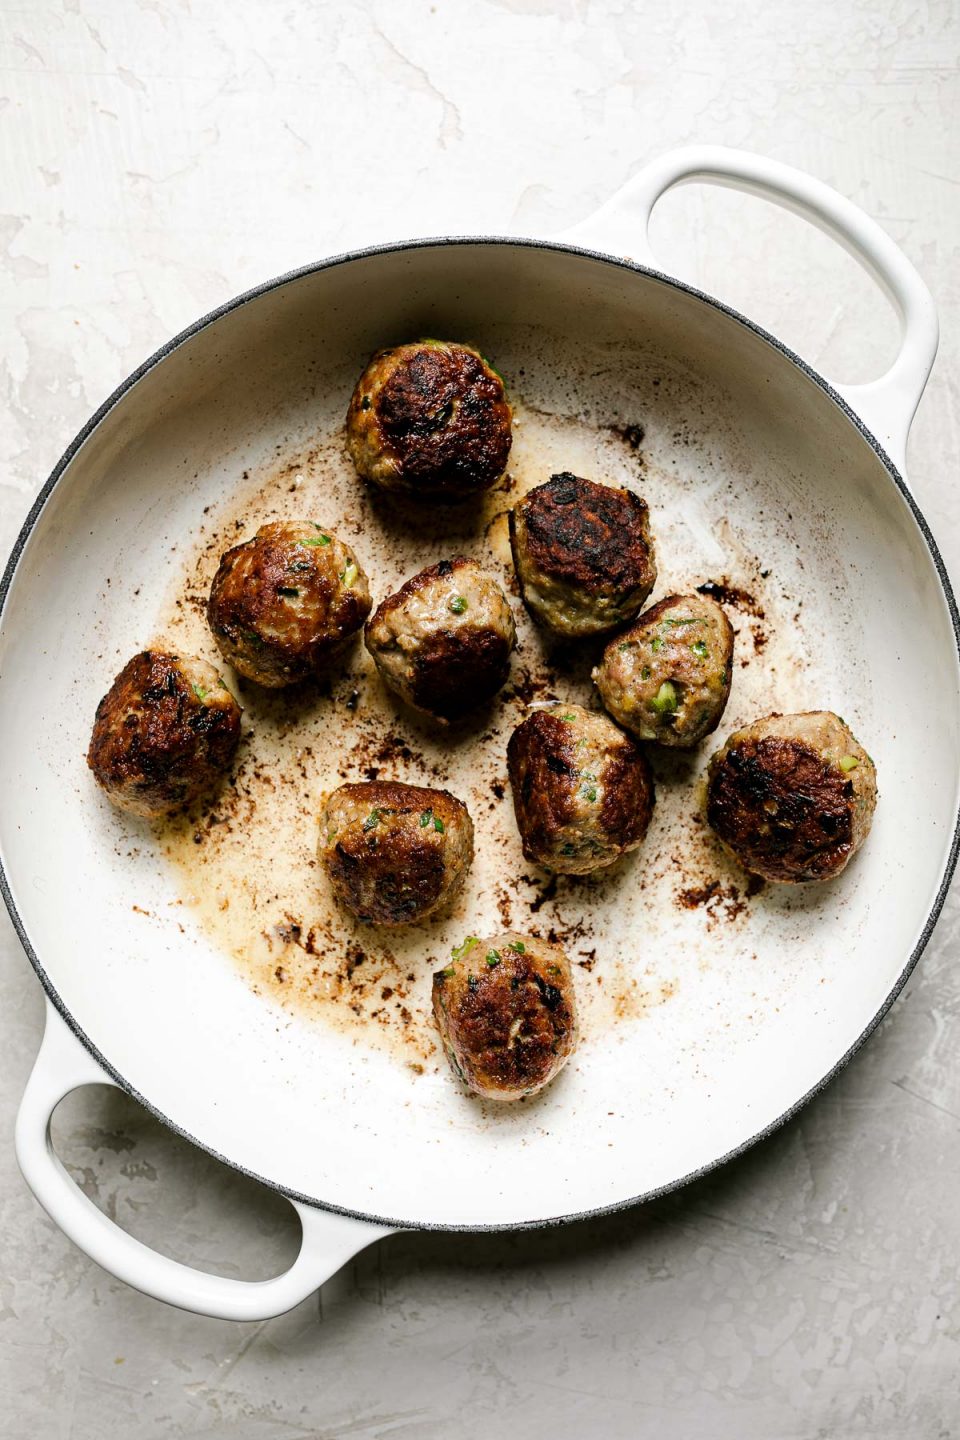 How to make ginger meatballs – browned meatballs in white enameled braising pan atop a creamy cement surface.